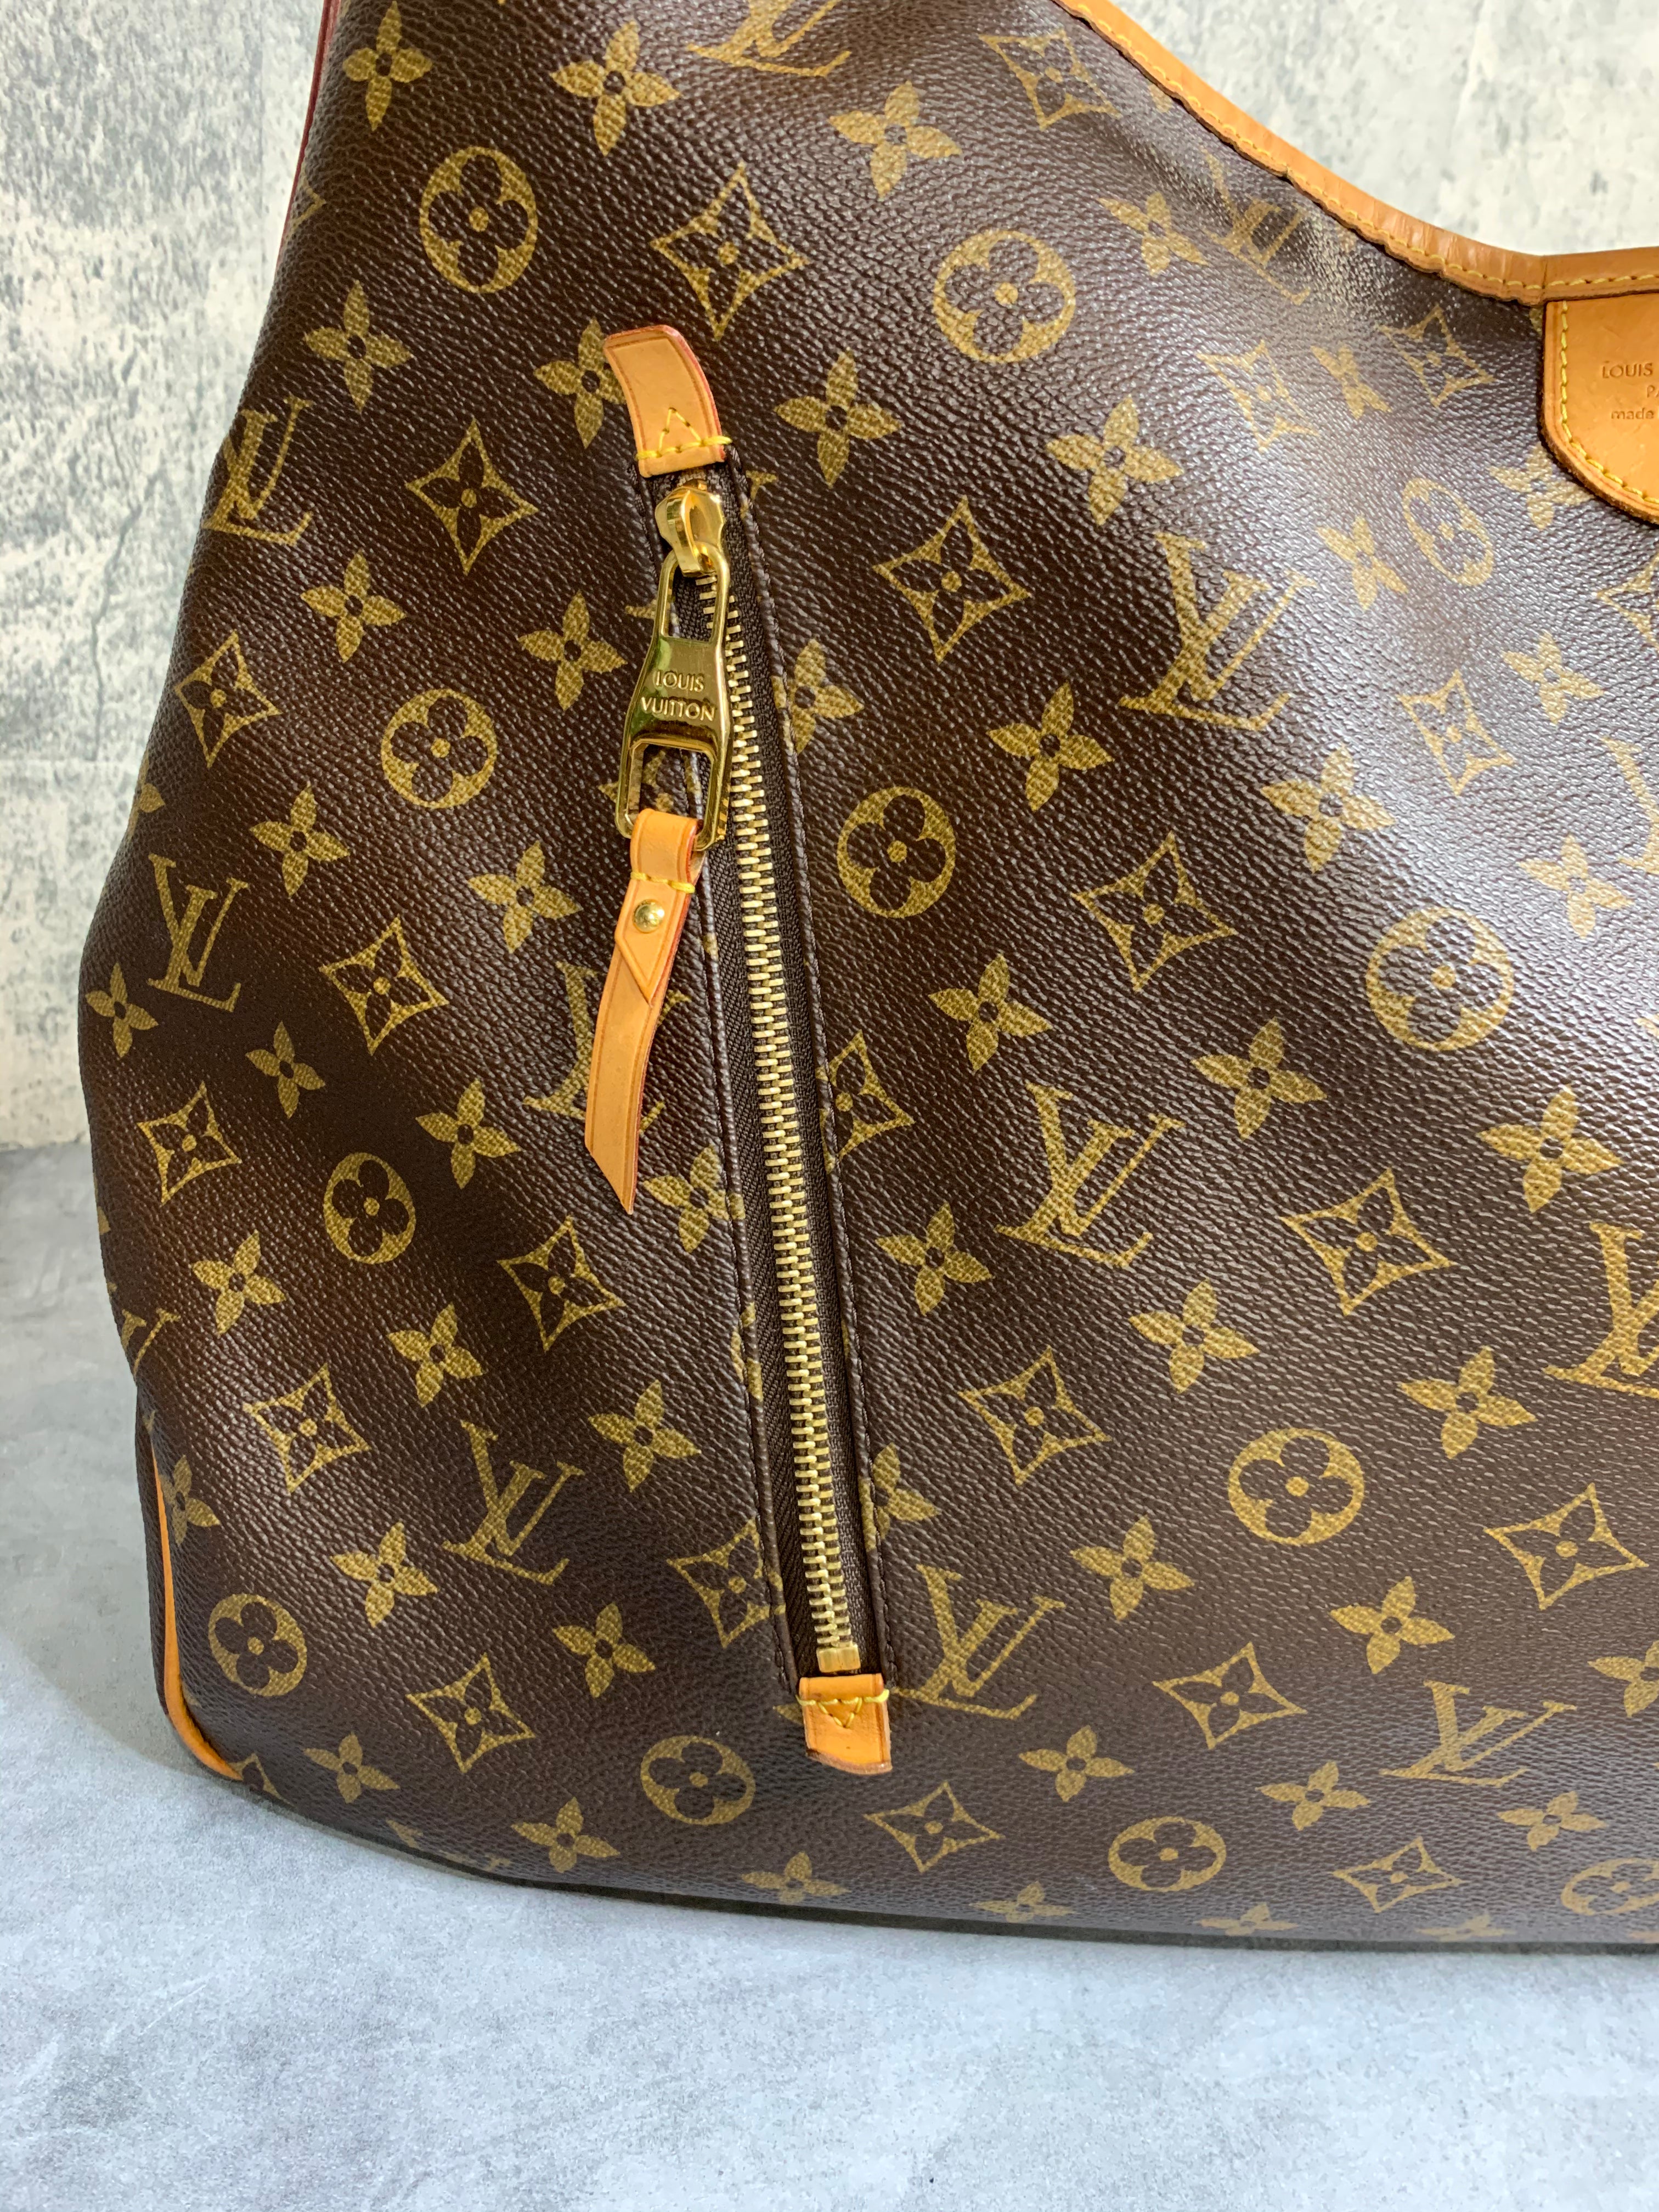 Used Louis Vuitton Tote Bag Delightful GM